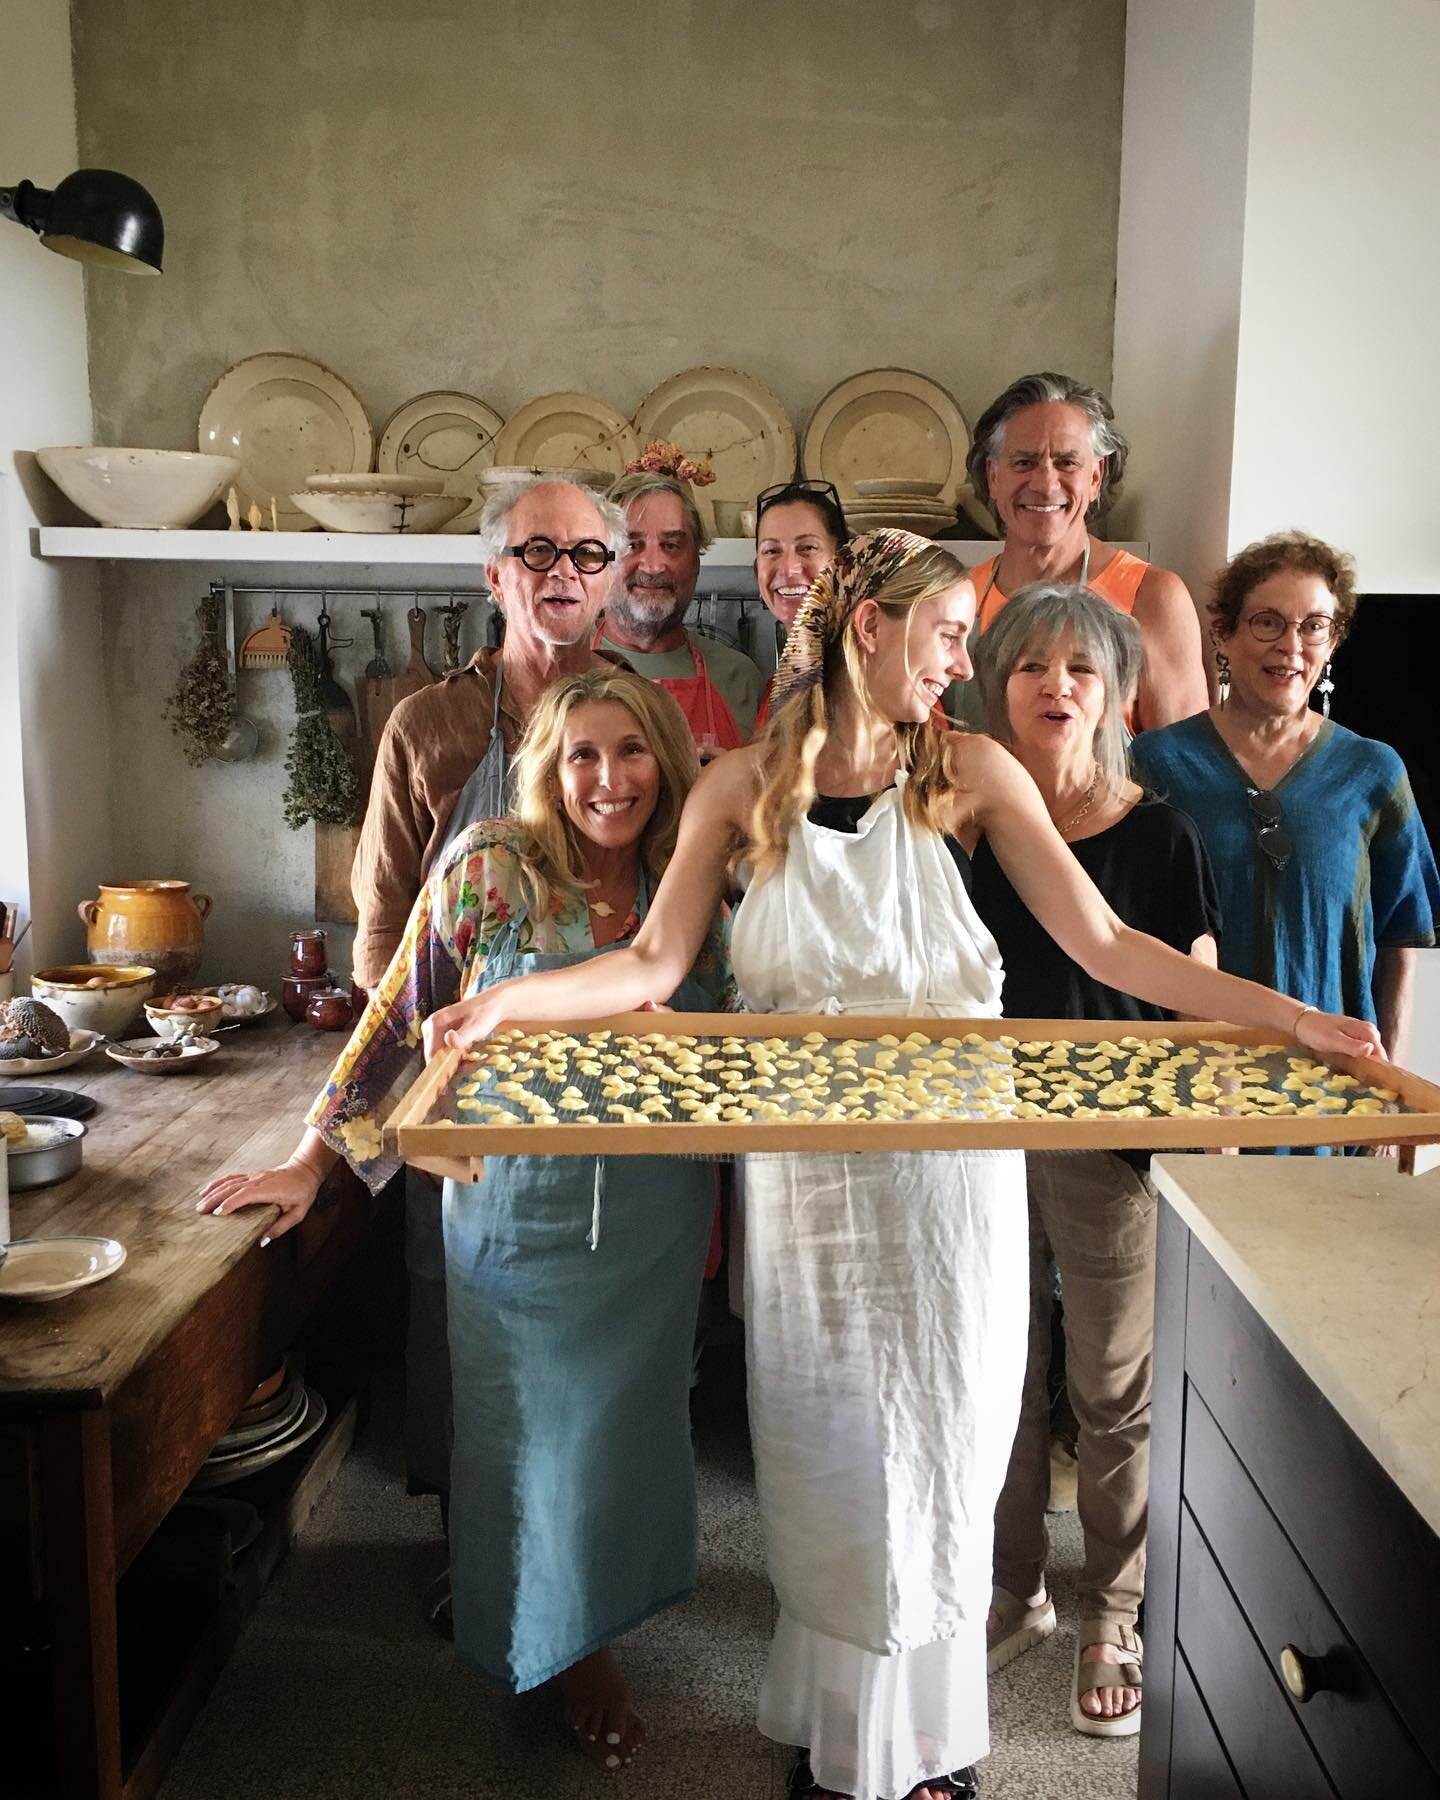 Five beautiful days with this truly lovely group. We made semola pasta, taralli, tiella Barese, arugula pesto, ricotta gnocchi, bay laurel digestivo, giardiniera, pistachio cake, stuffed zucchini blossoms, sugo and polpette and many, many vegetable d